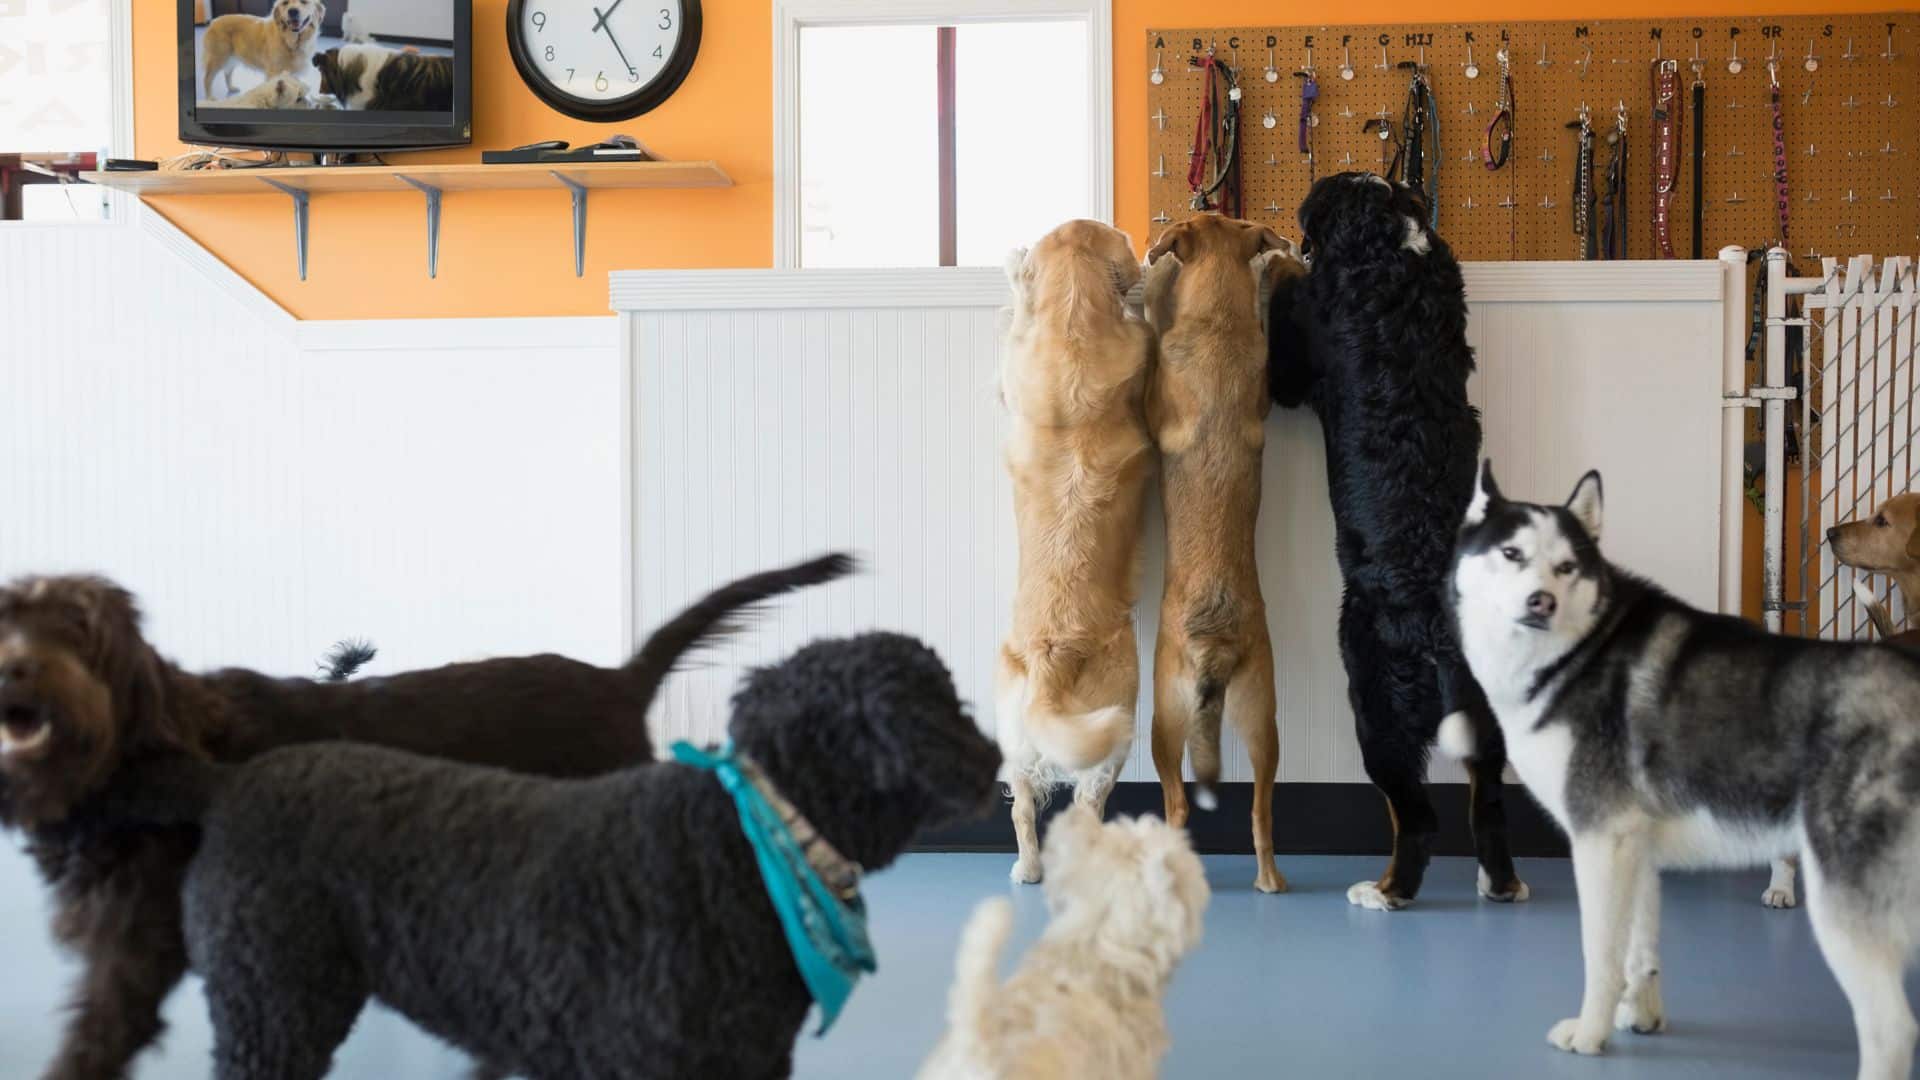 Do you need a license to open a dog daycare?